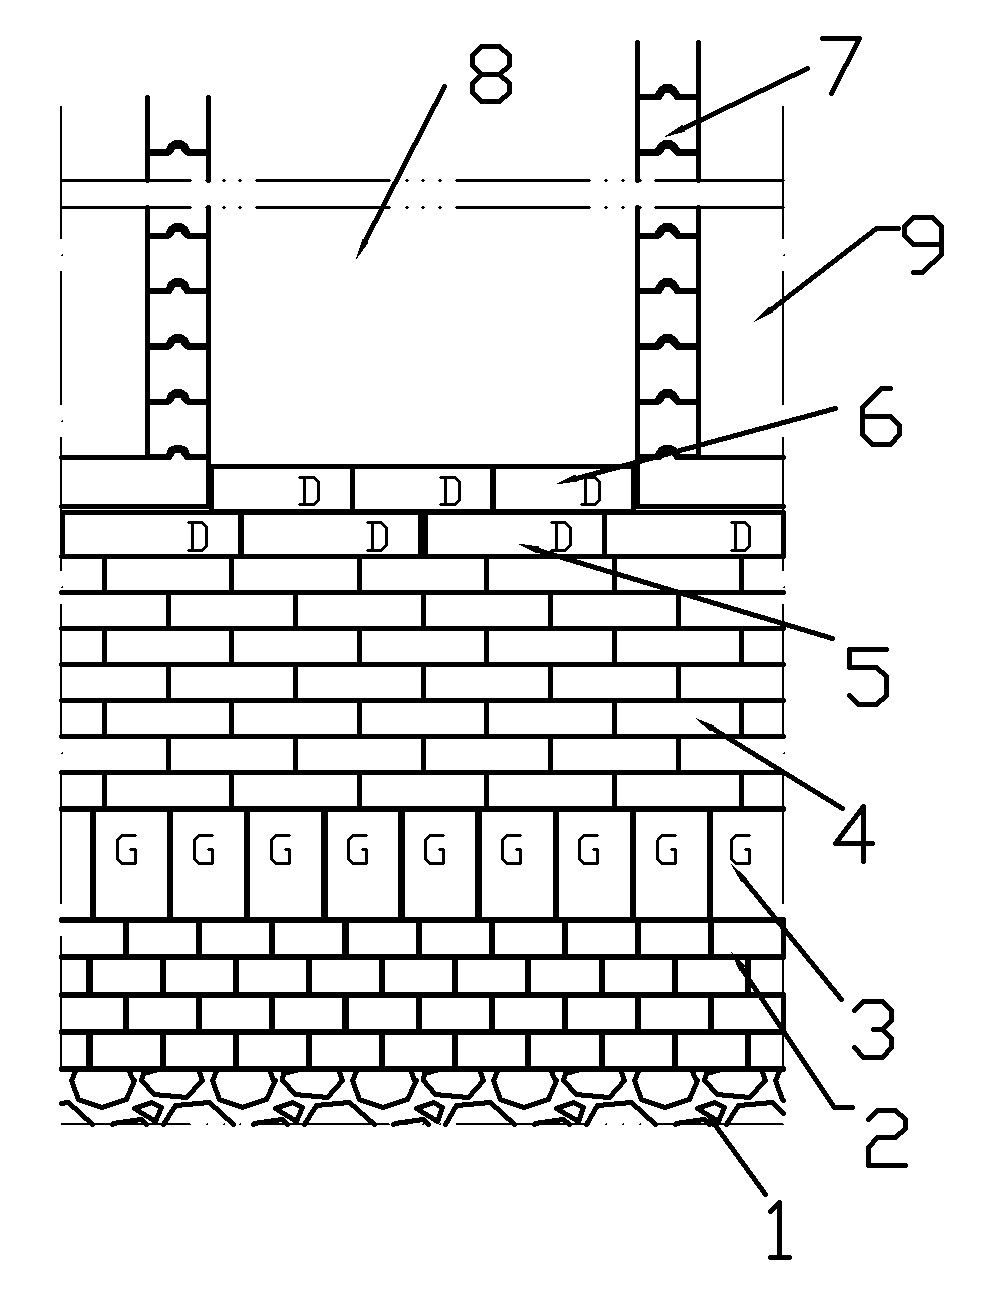 Hearth refractory material structure of carbon roasting furnace